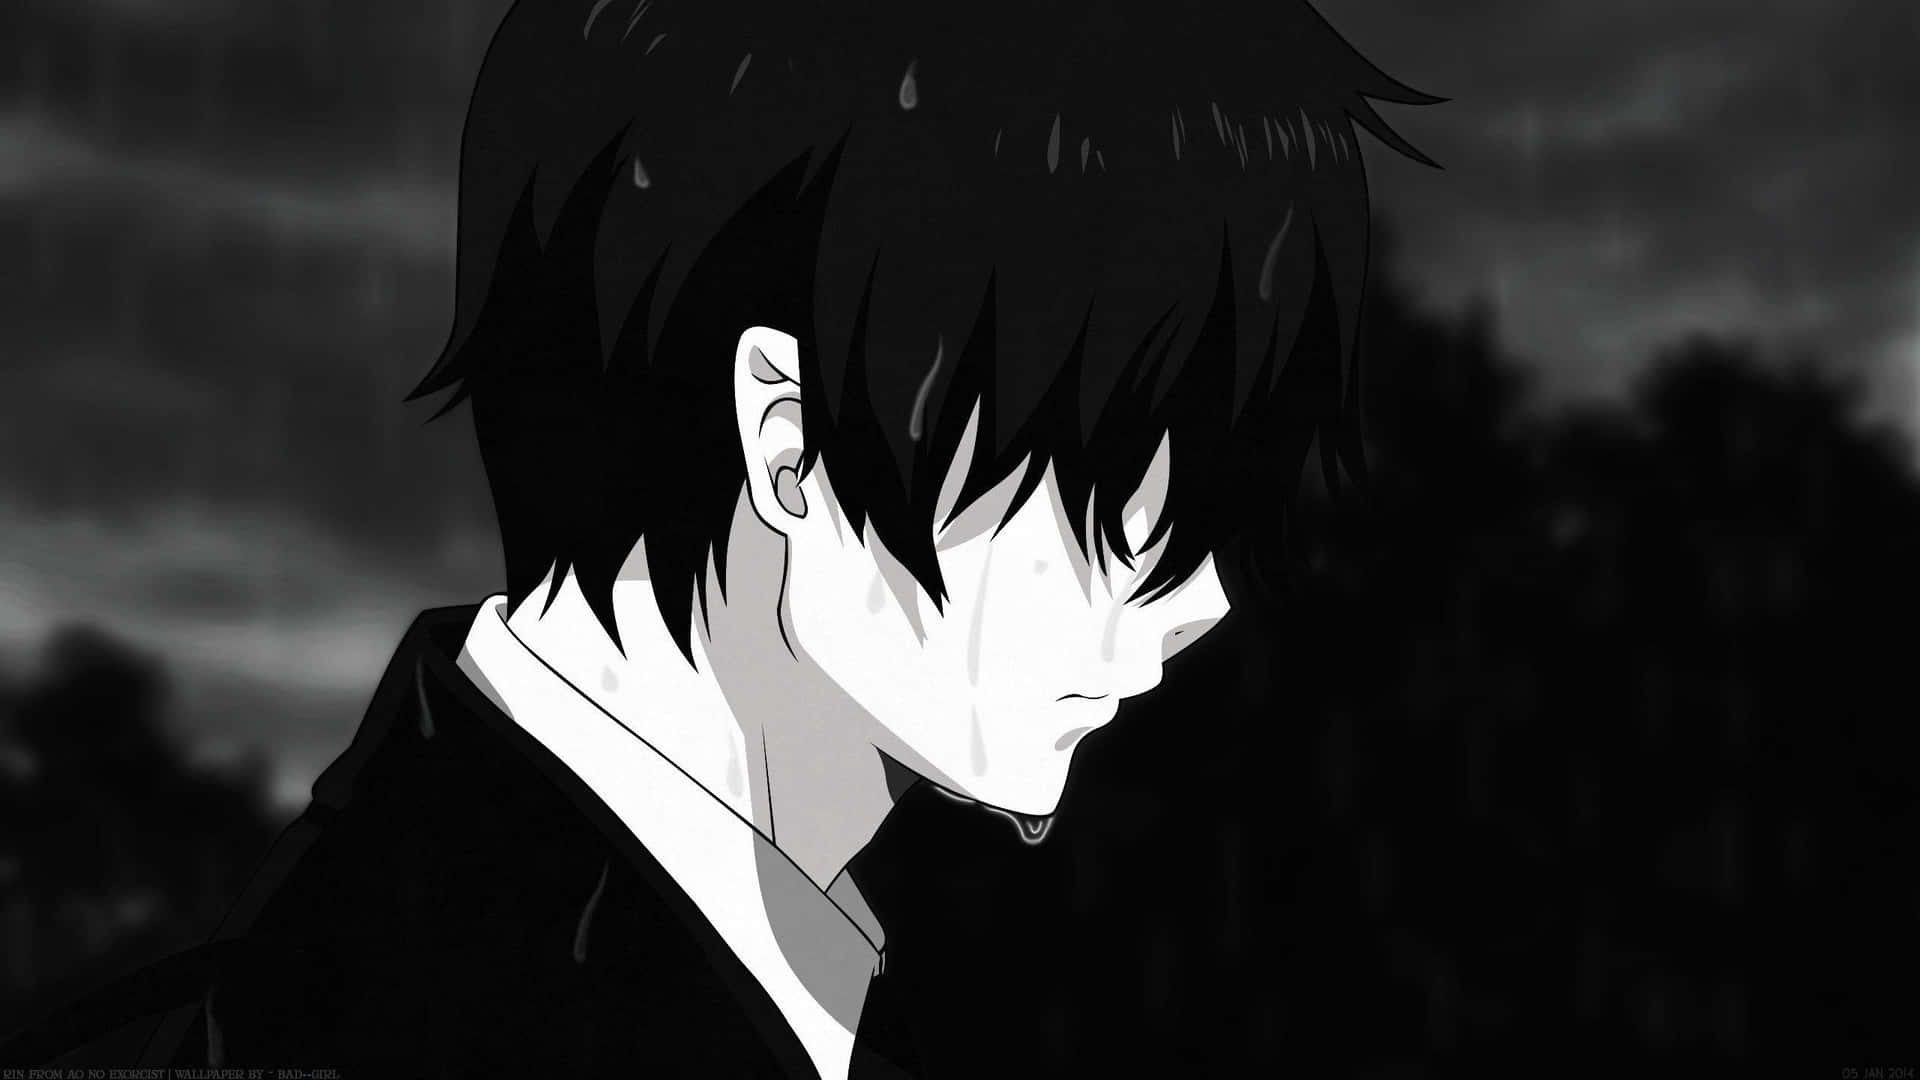 Loneliness of an Anime Character in Black and White Wallpaper